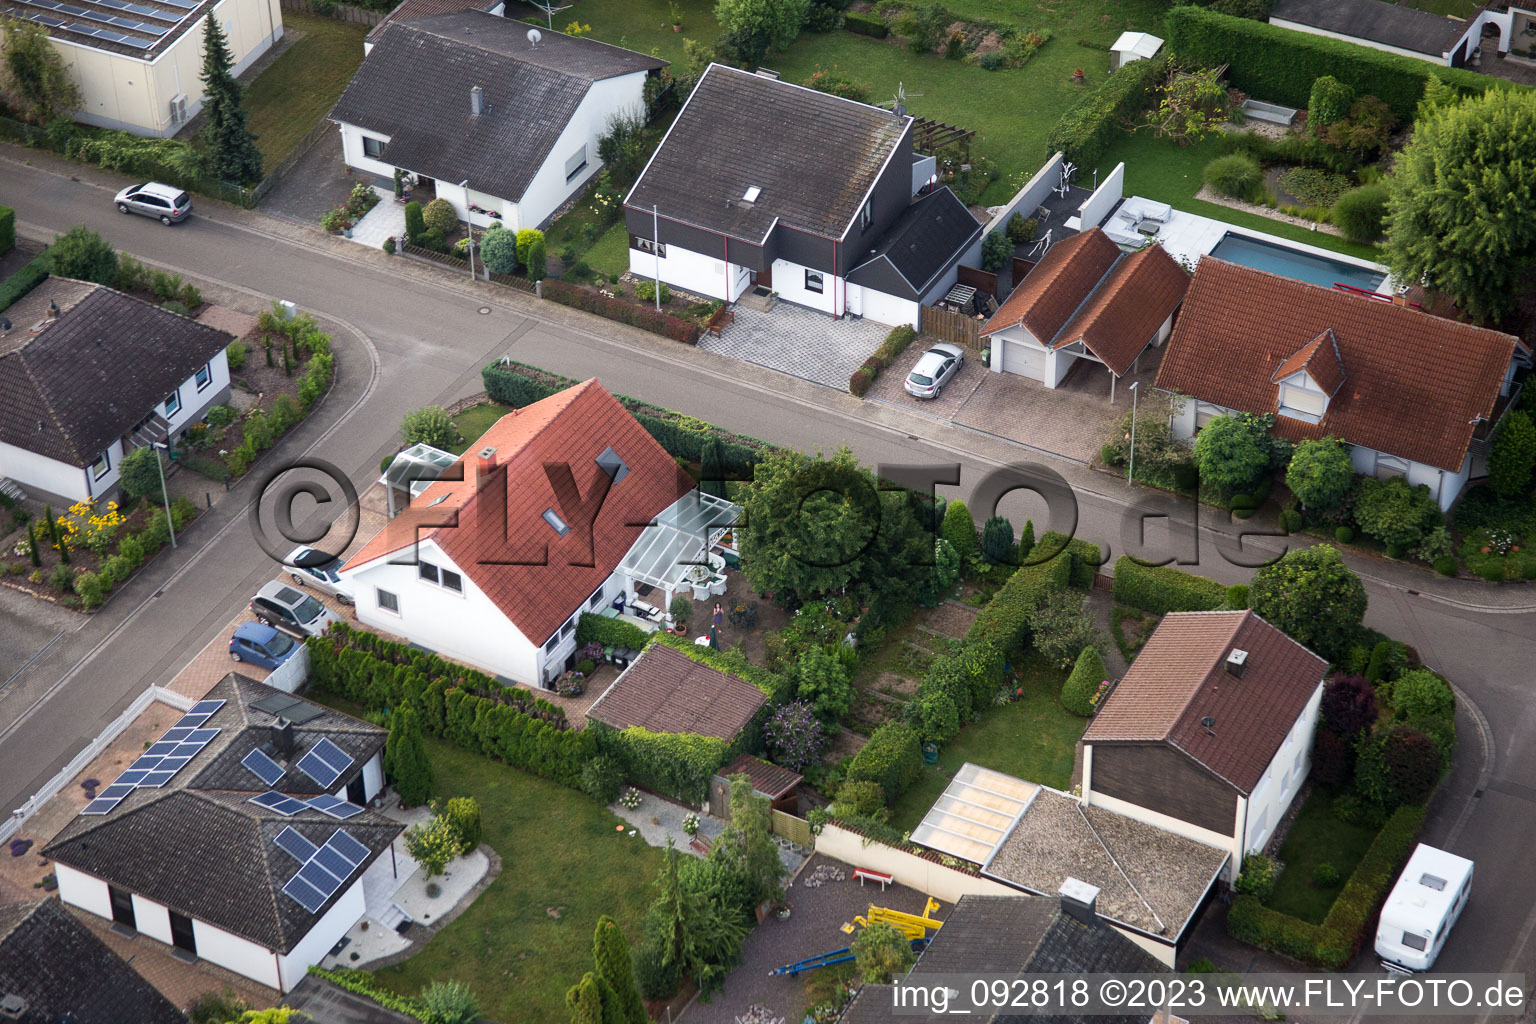 Aerial photograpy of Maxburgstr in the district Billigheim in Billigheim-Ingenheim in the state Rhineland-Palatinate, Germany